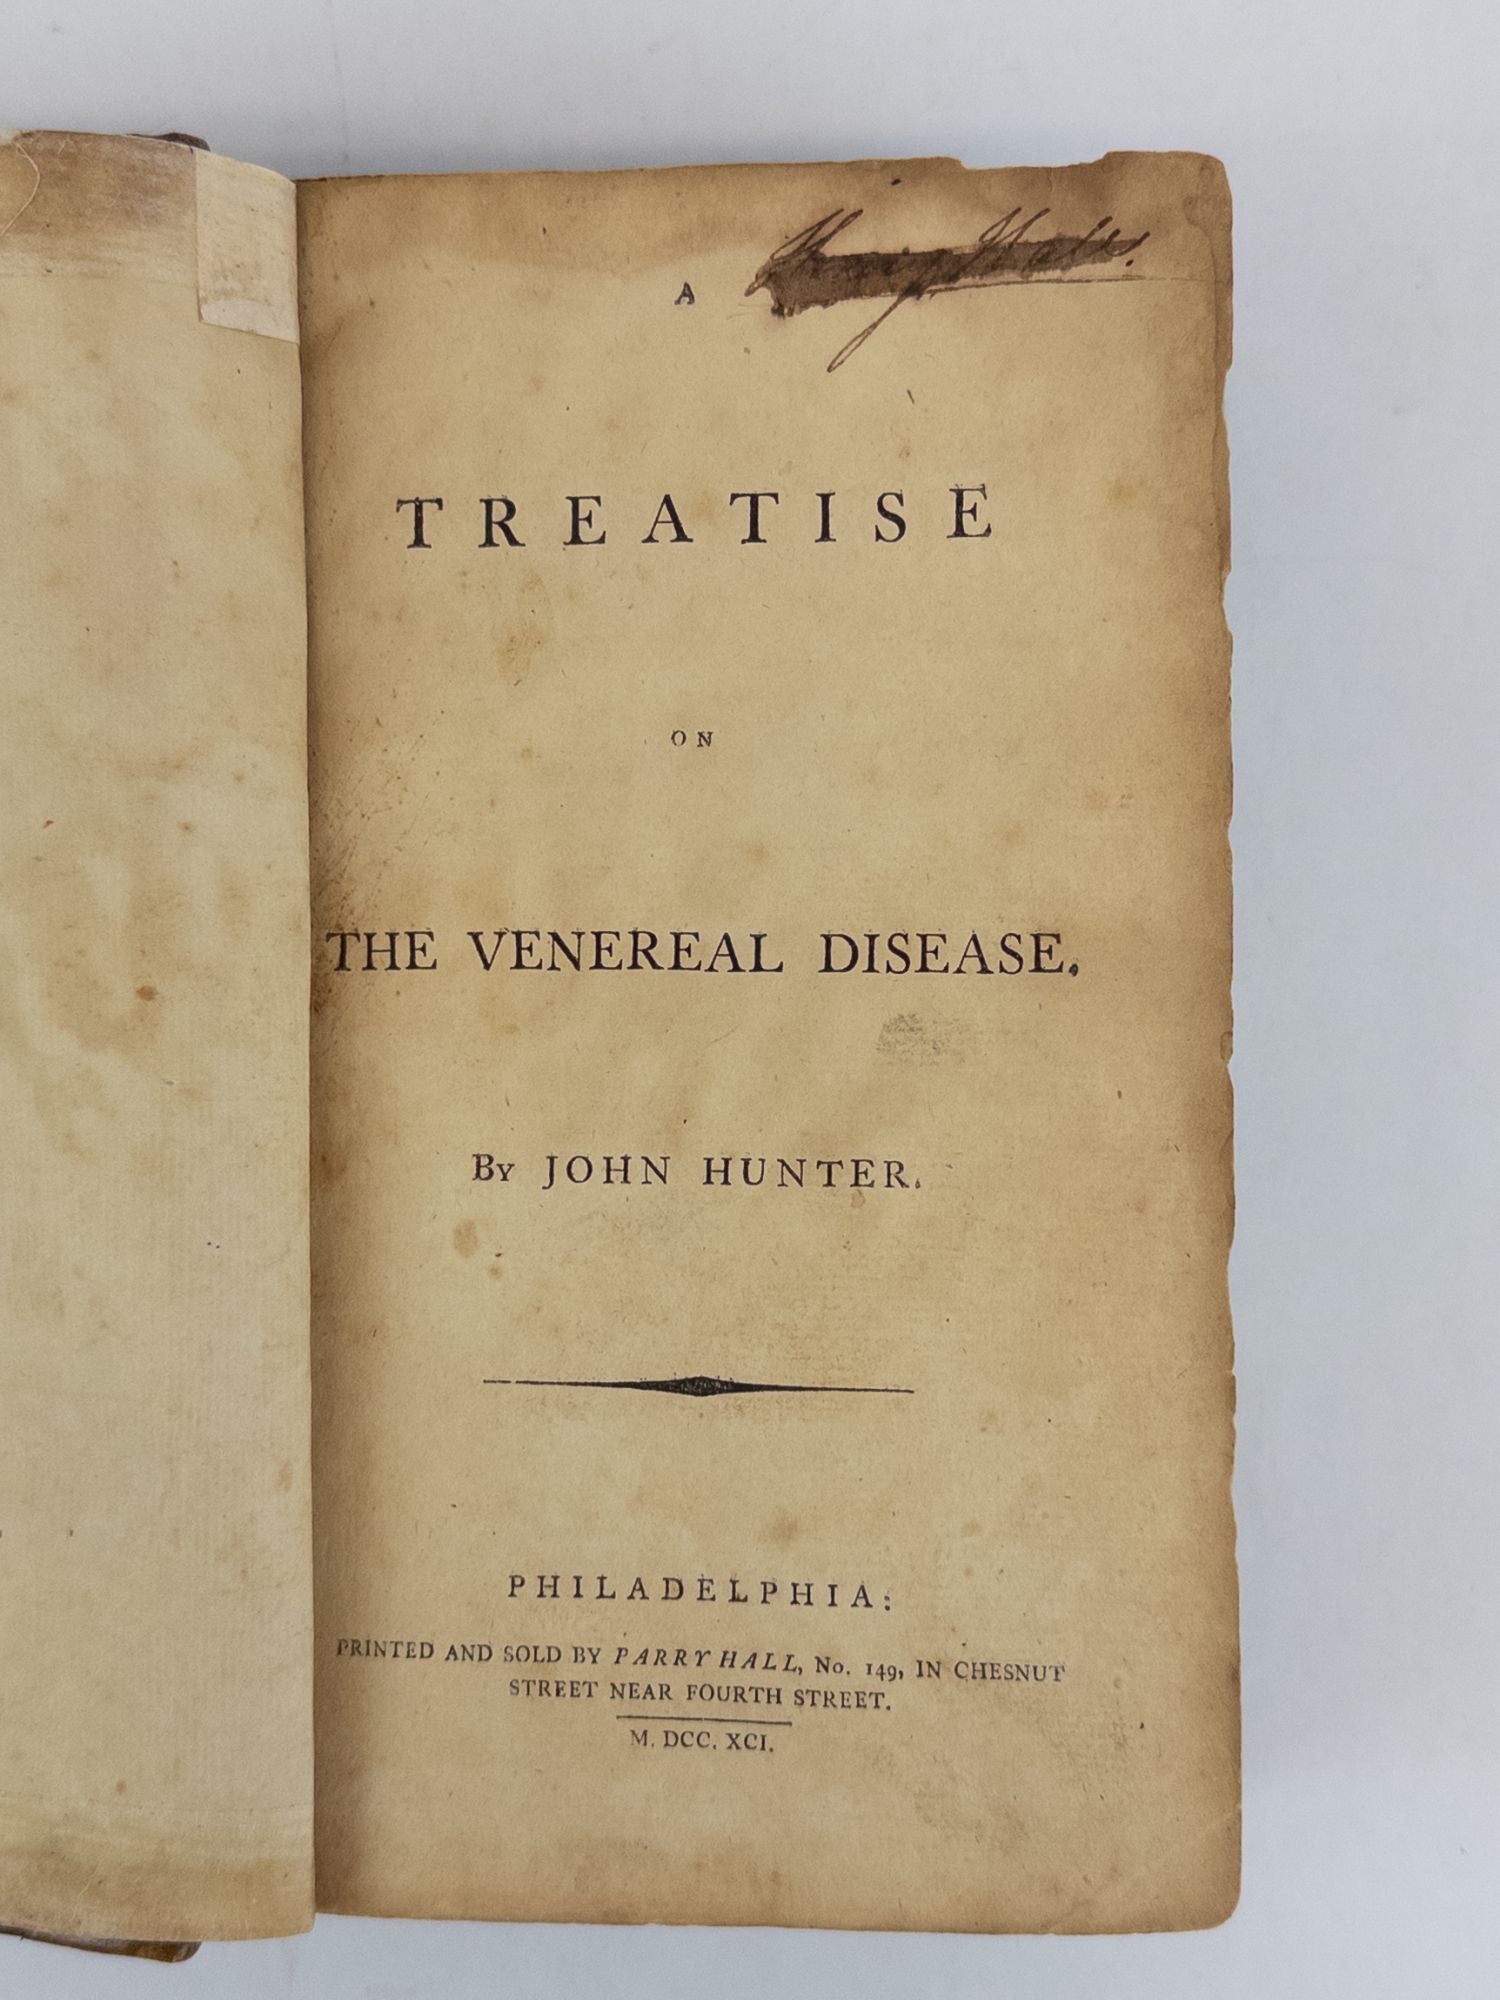 Product Image for A TREATISE ON THE VENEREAL DISEASE